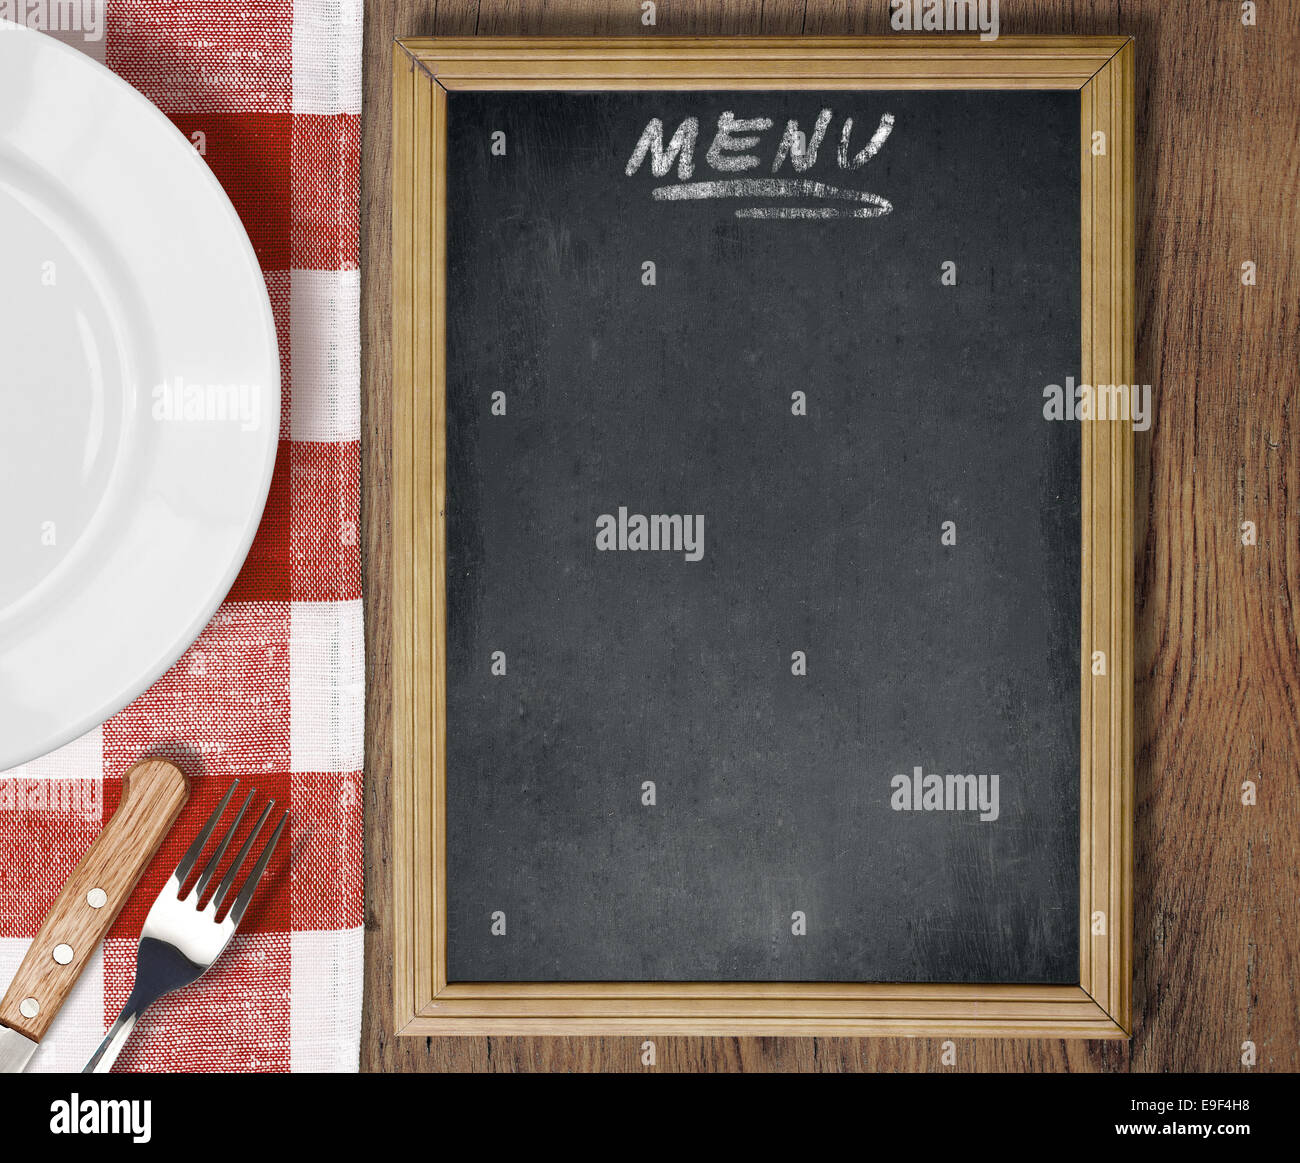 Menu blackboard top view on table with dish, knife and fork Stock Photo